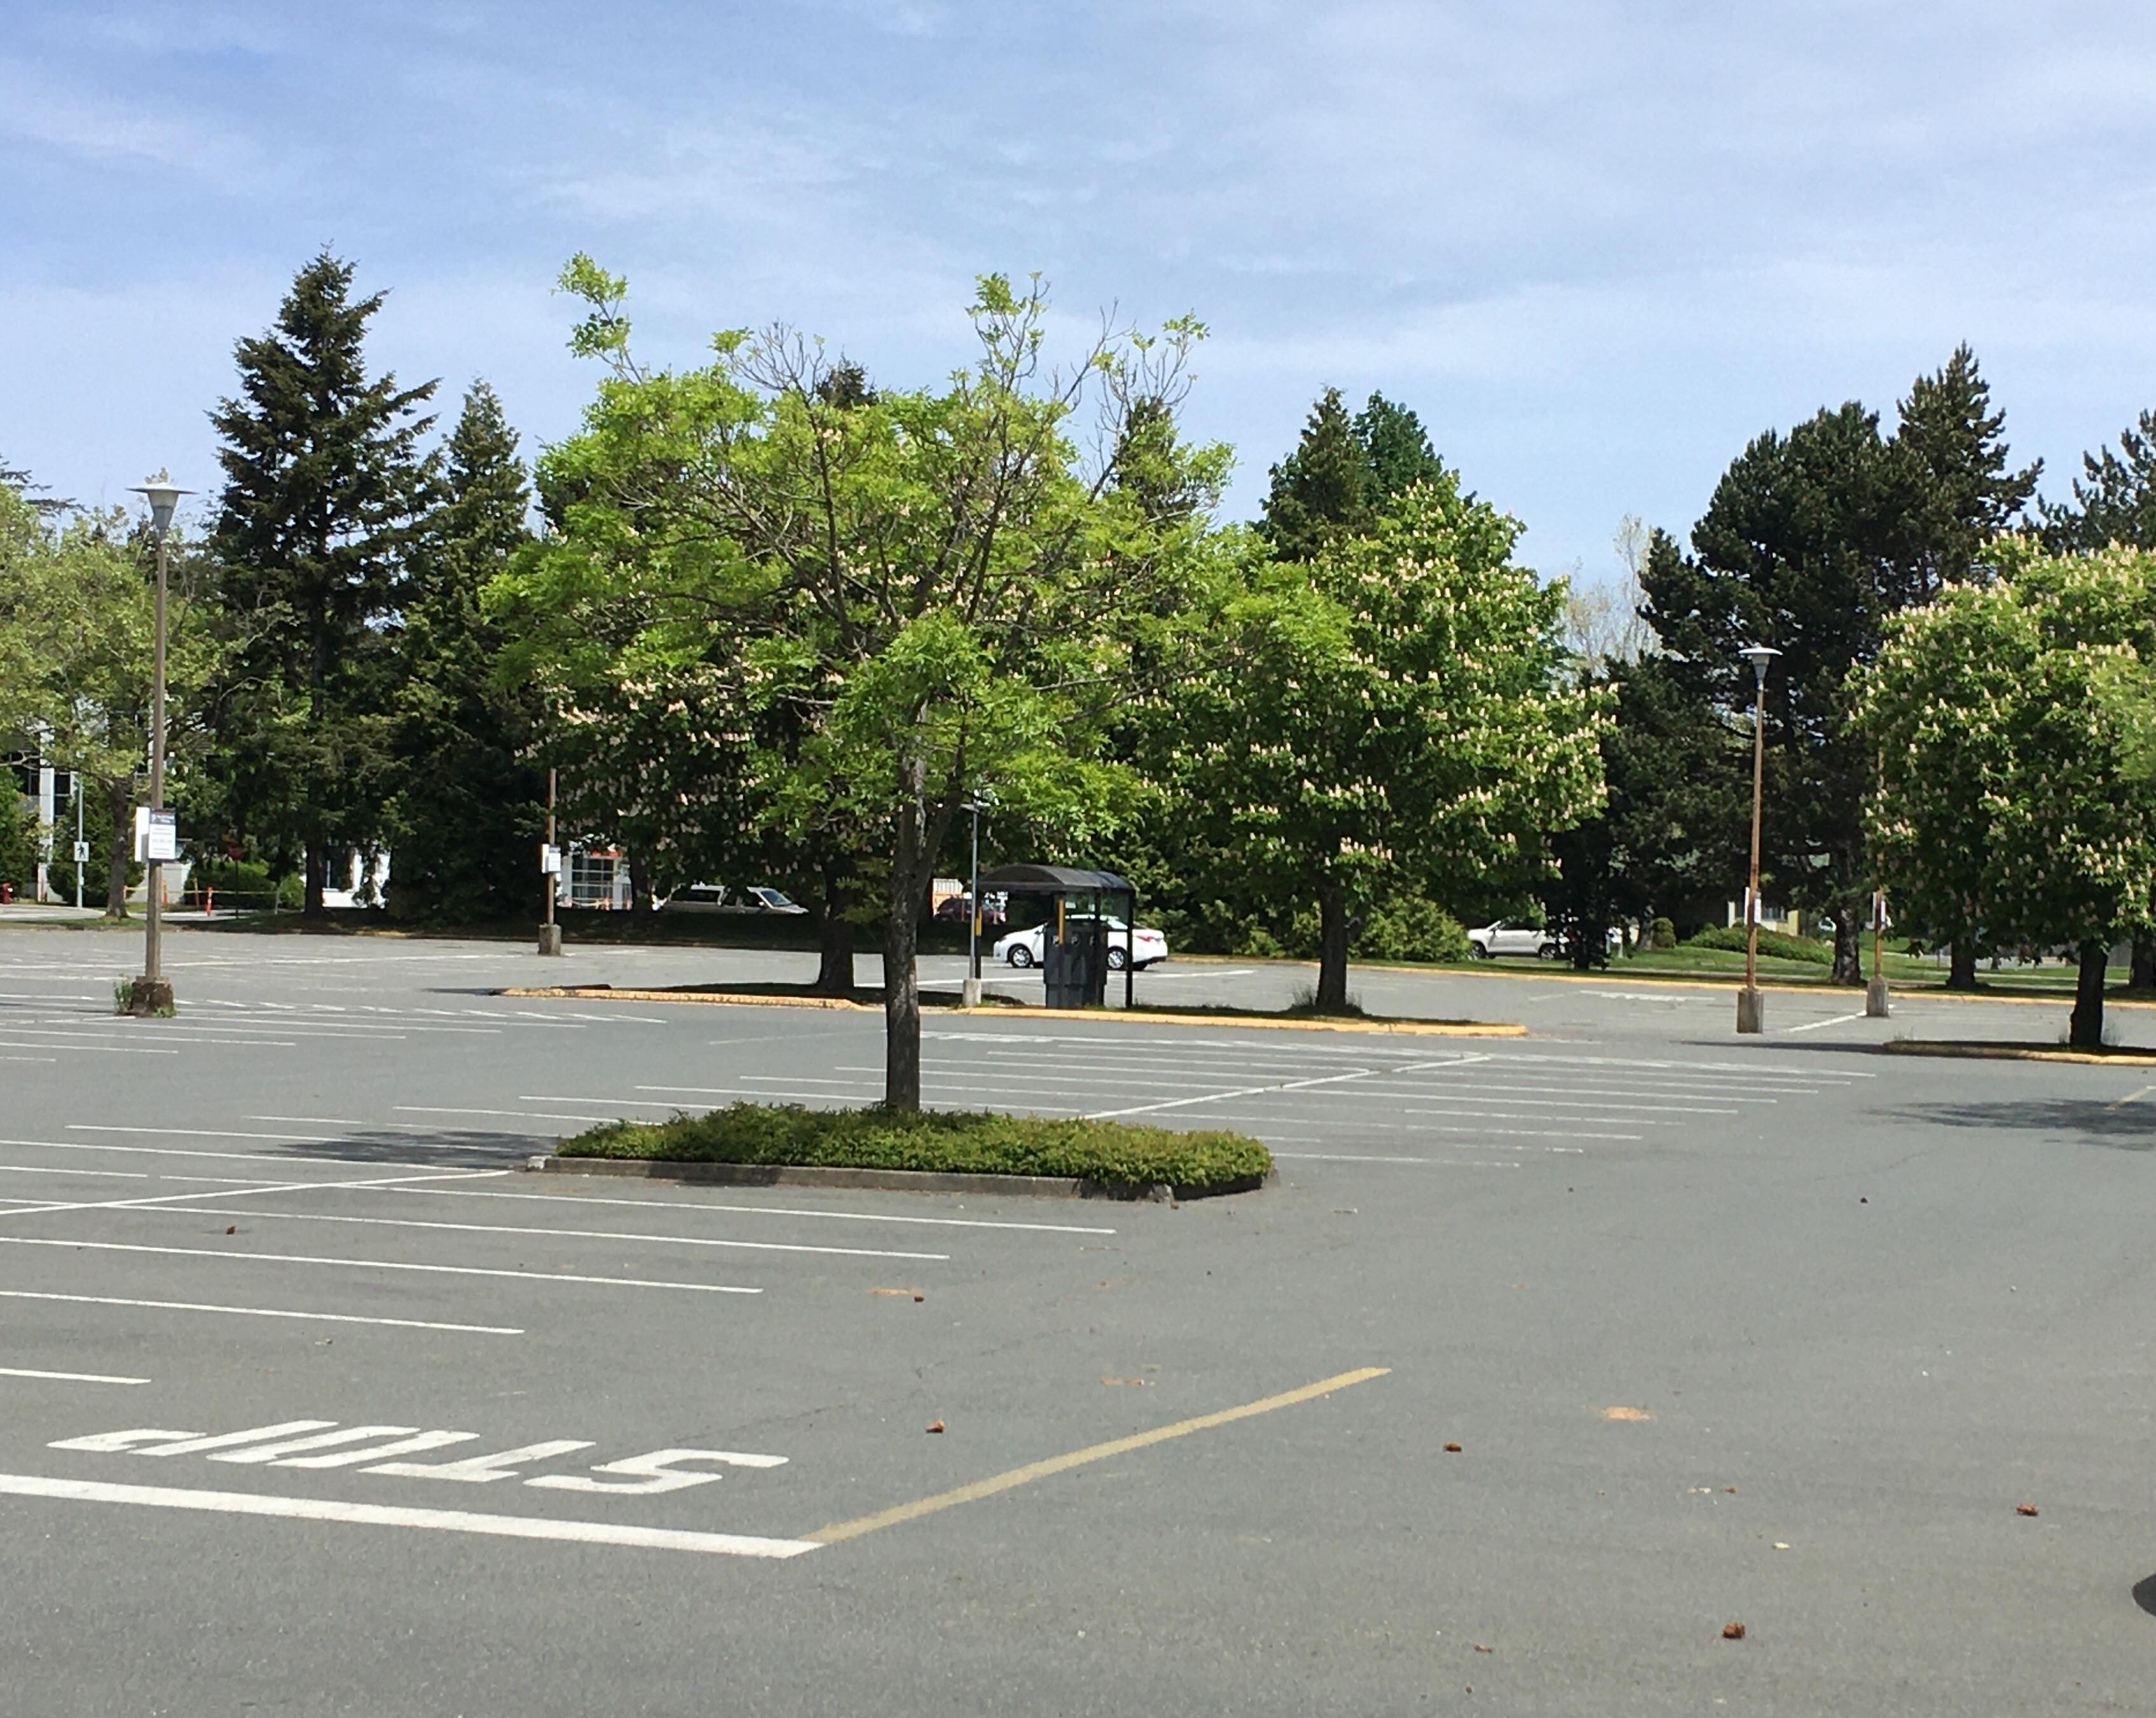 Lawsuit filed against UVic over parking passes